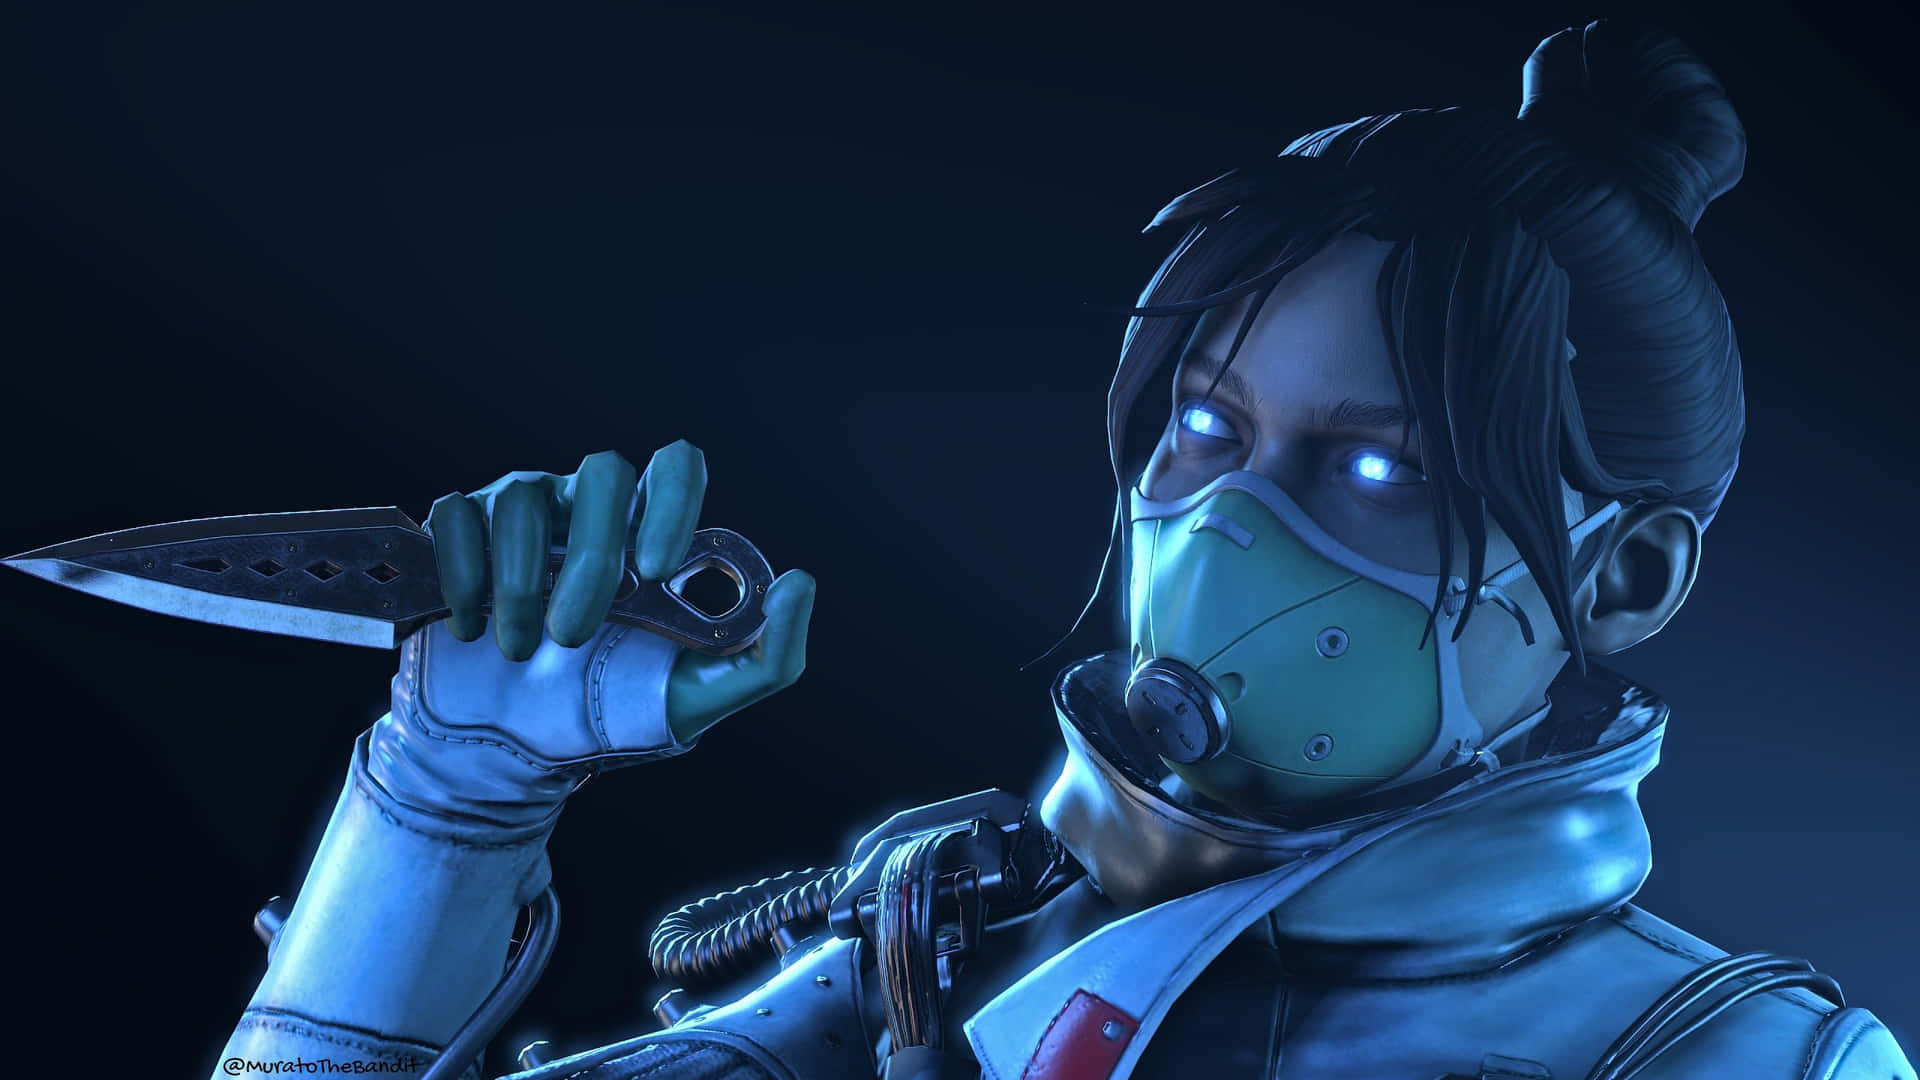 Feel the adrenaline of Apex Legends on your computer Wallpaper